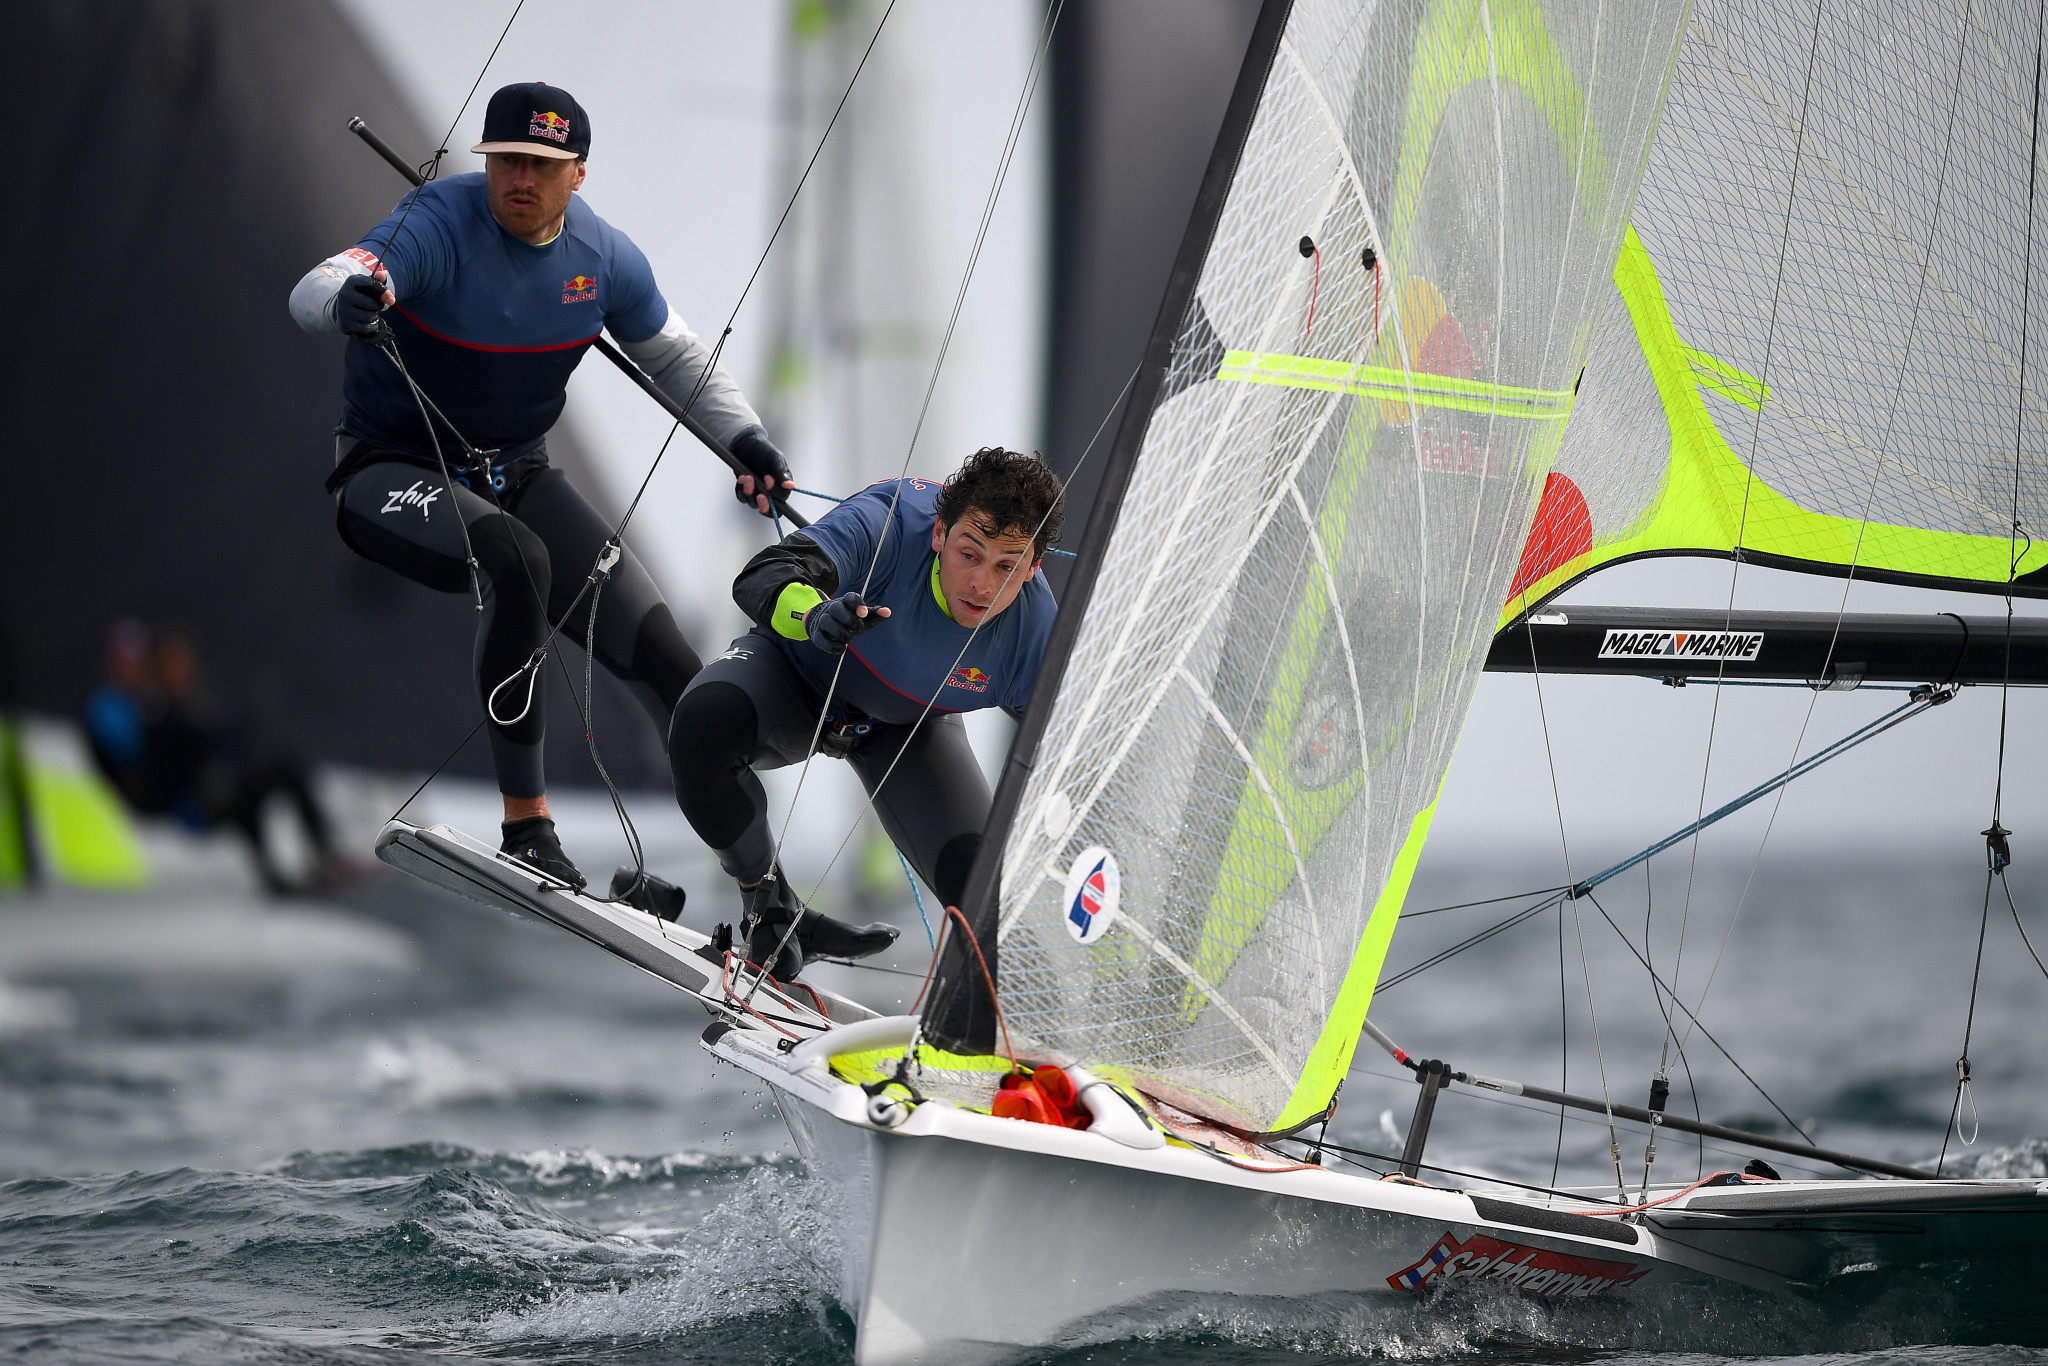 German pairing extend lead at 49er, 49erFX and Nacra 17 World Championships in Auckland